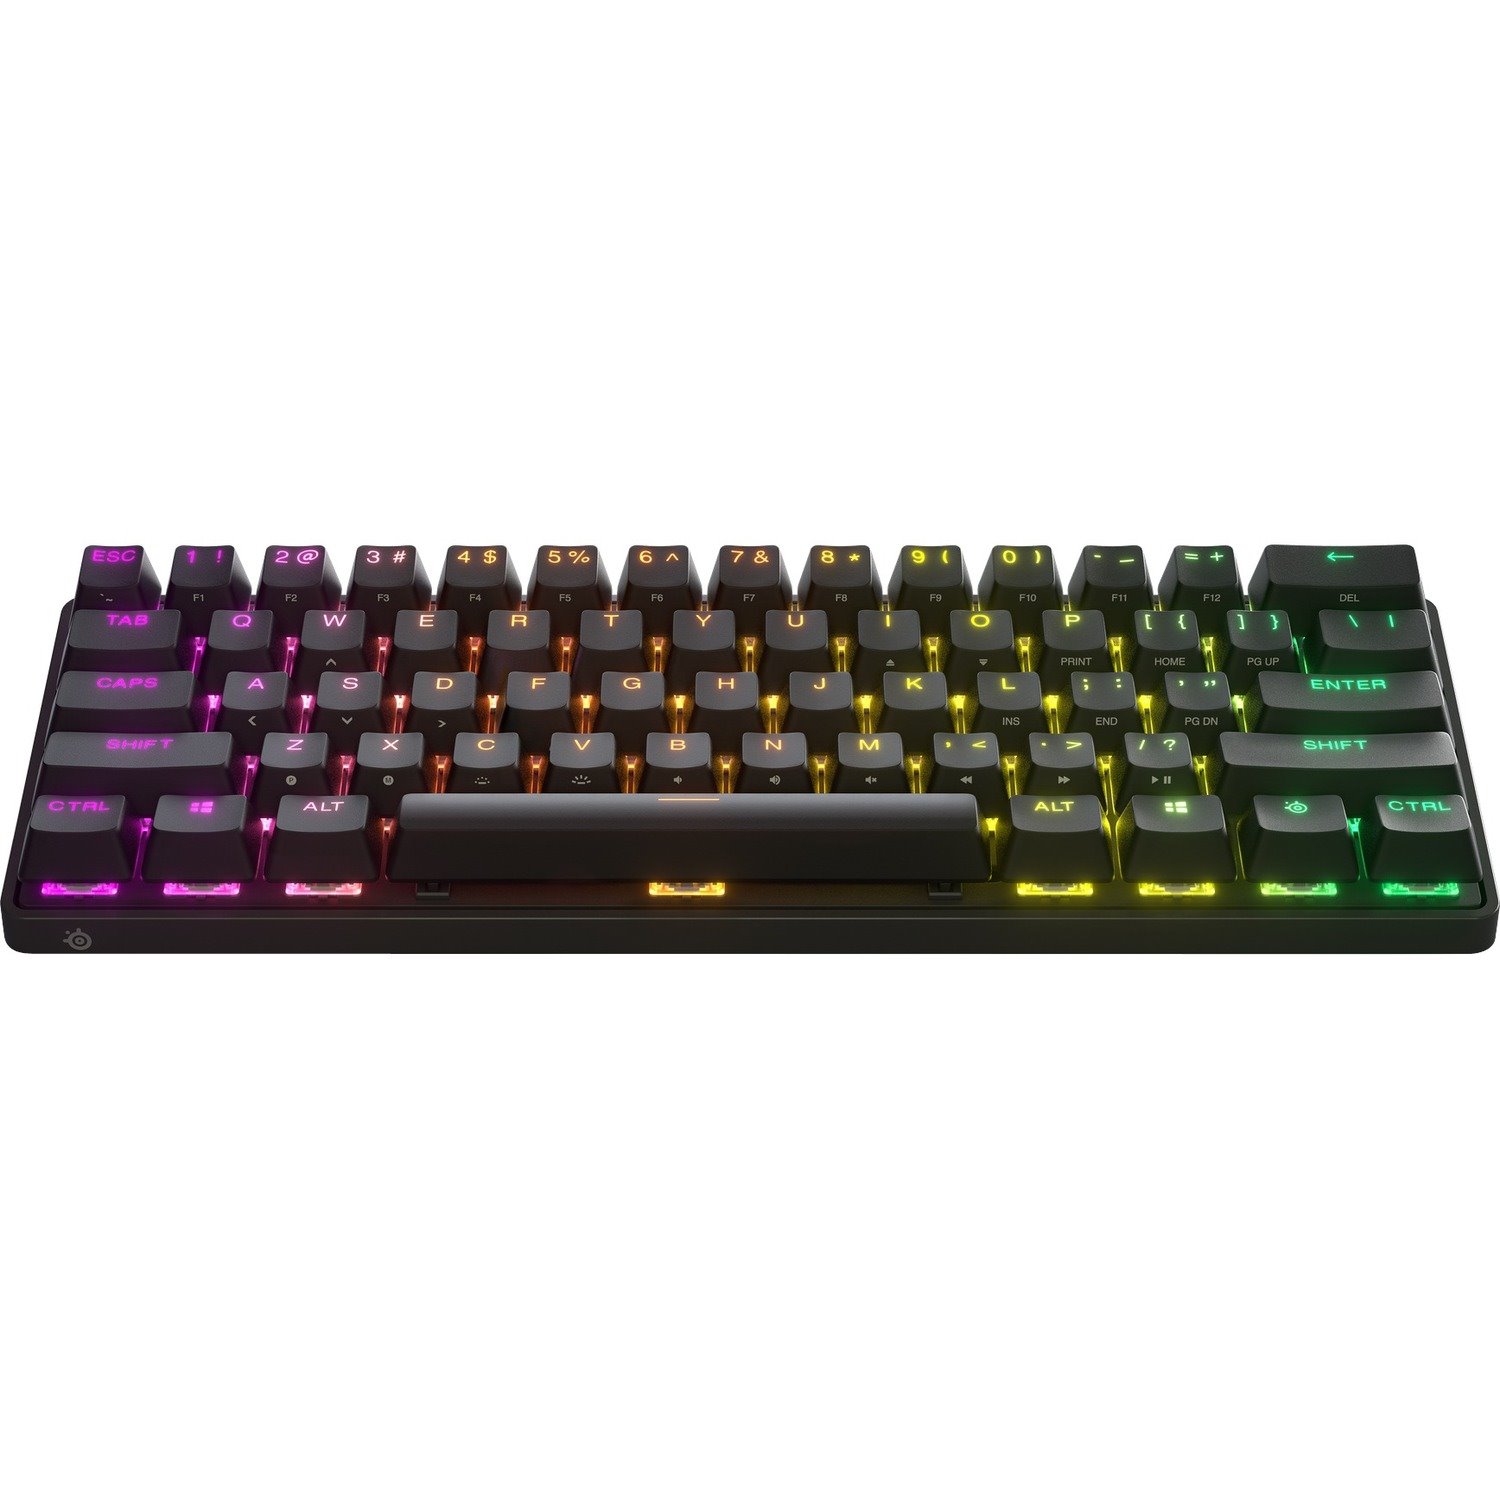 SteelSeries Apex Pro Mini Wireless Gaming Keyboard - Wired/Wireless Connectivity - USB Type C Interface - RGB LED - English (US)